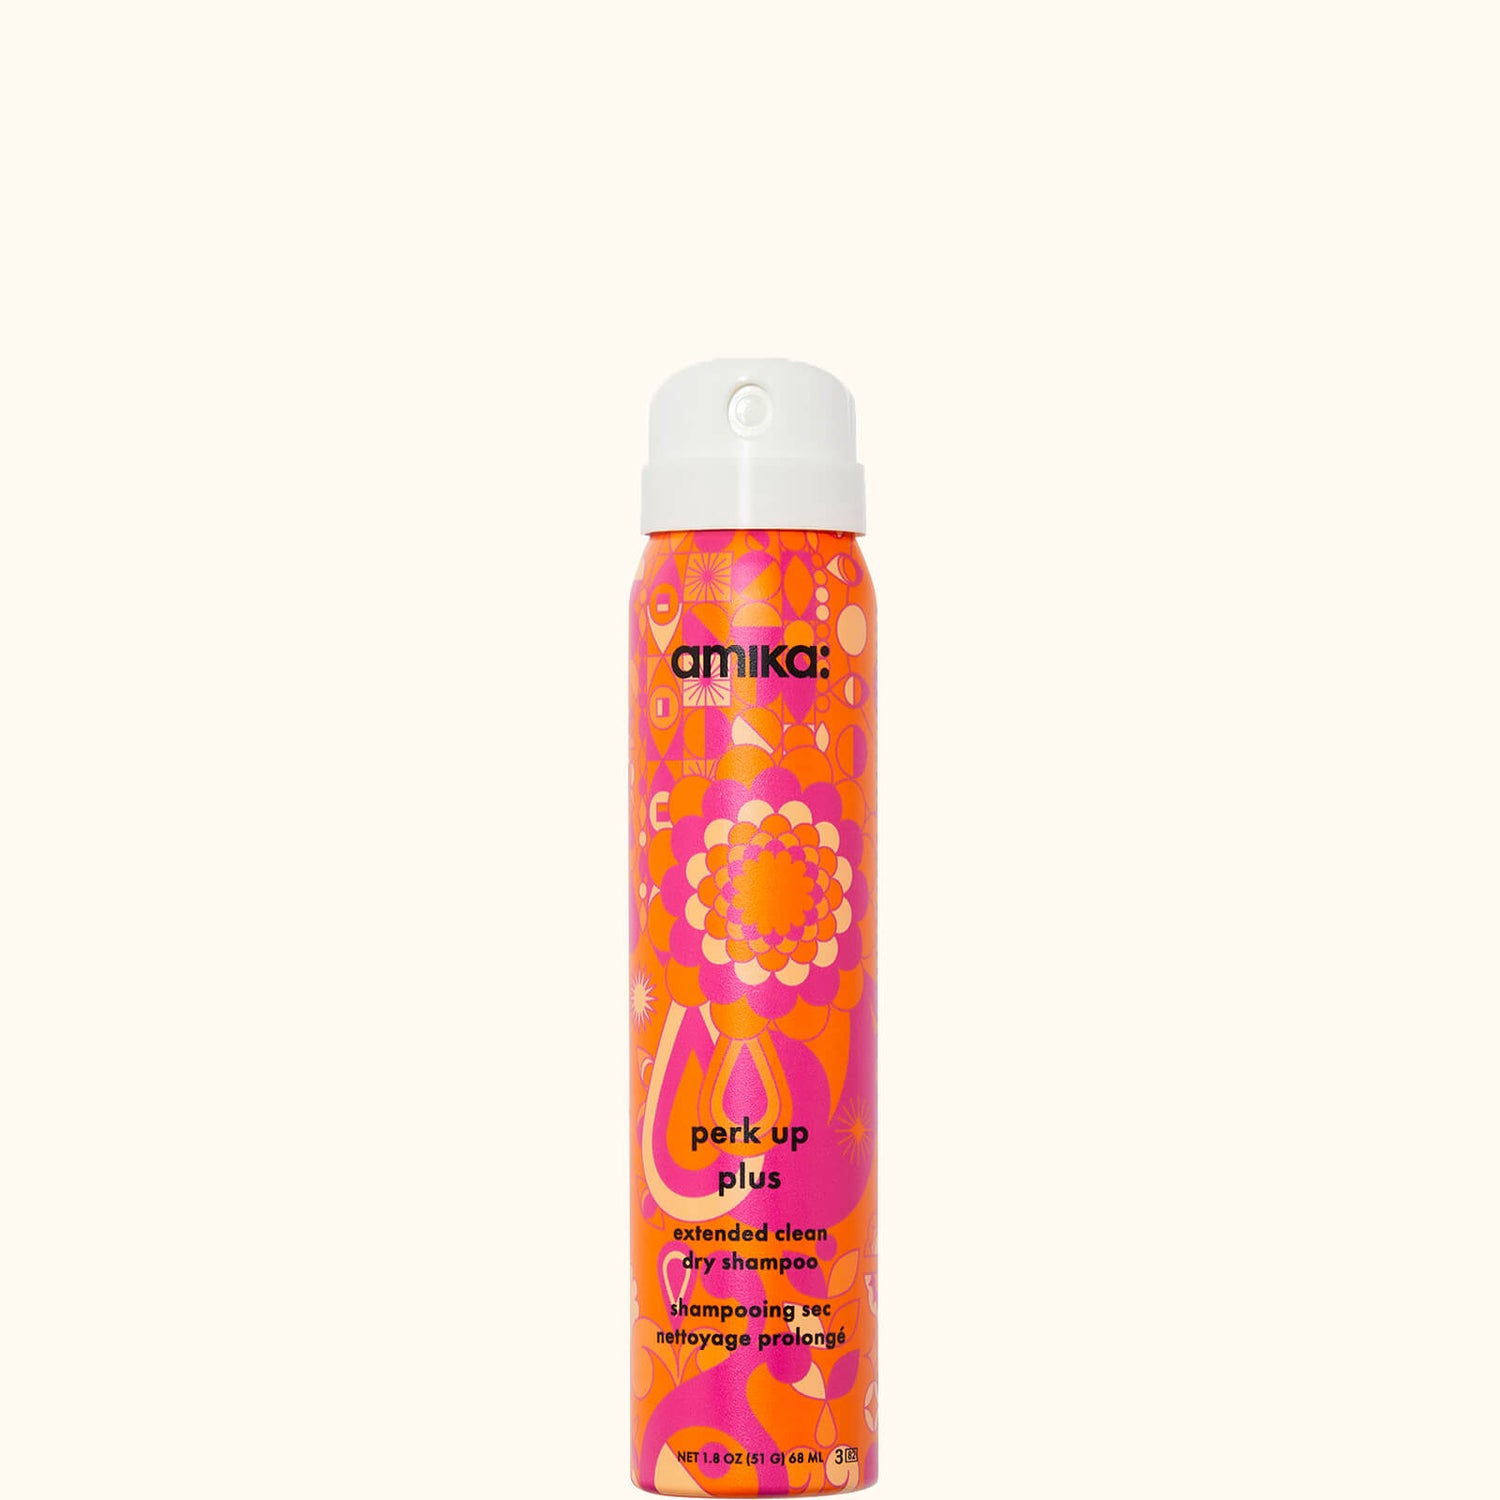 amika perk up plus extended clean dry shampoo